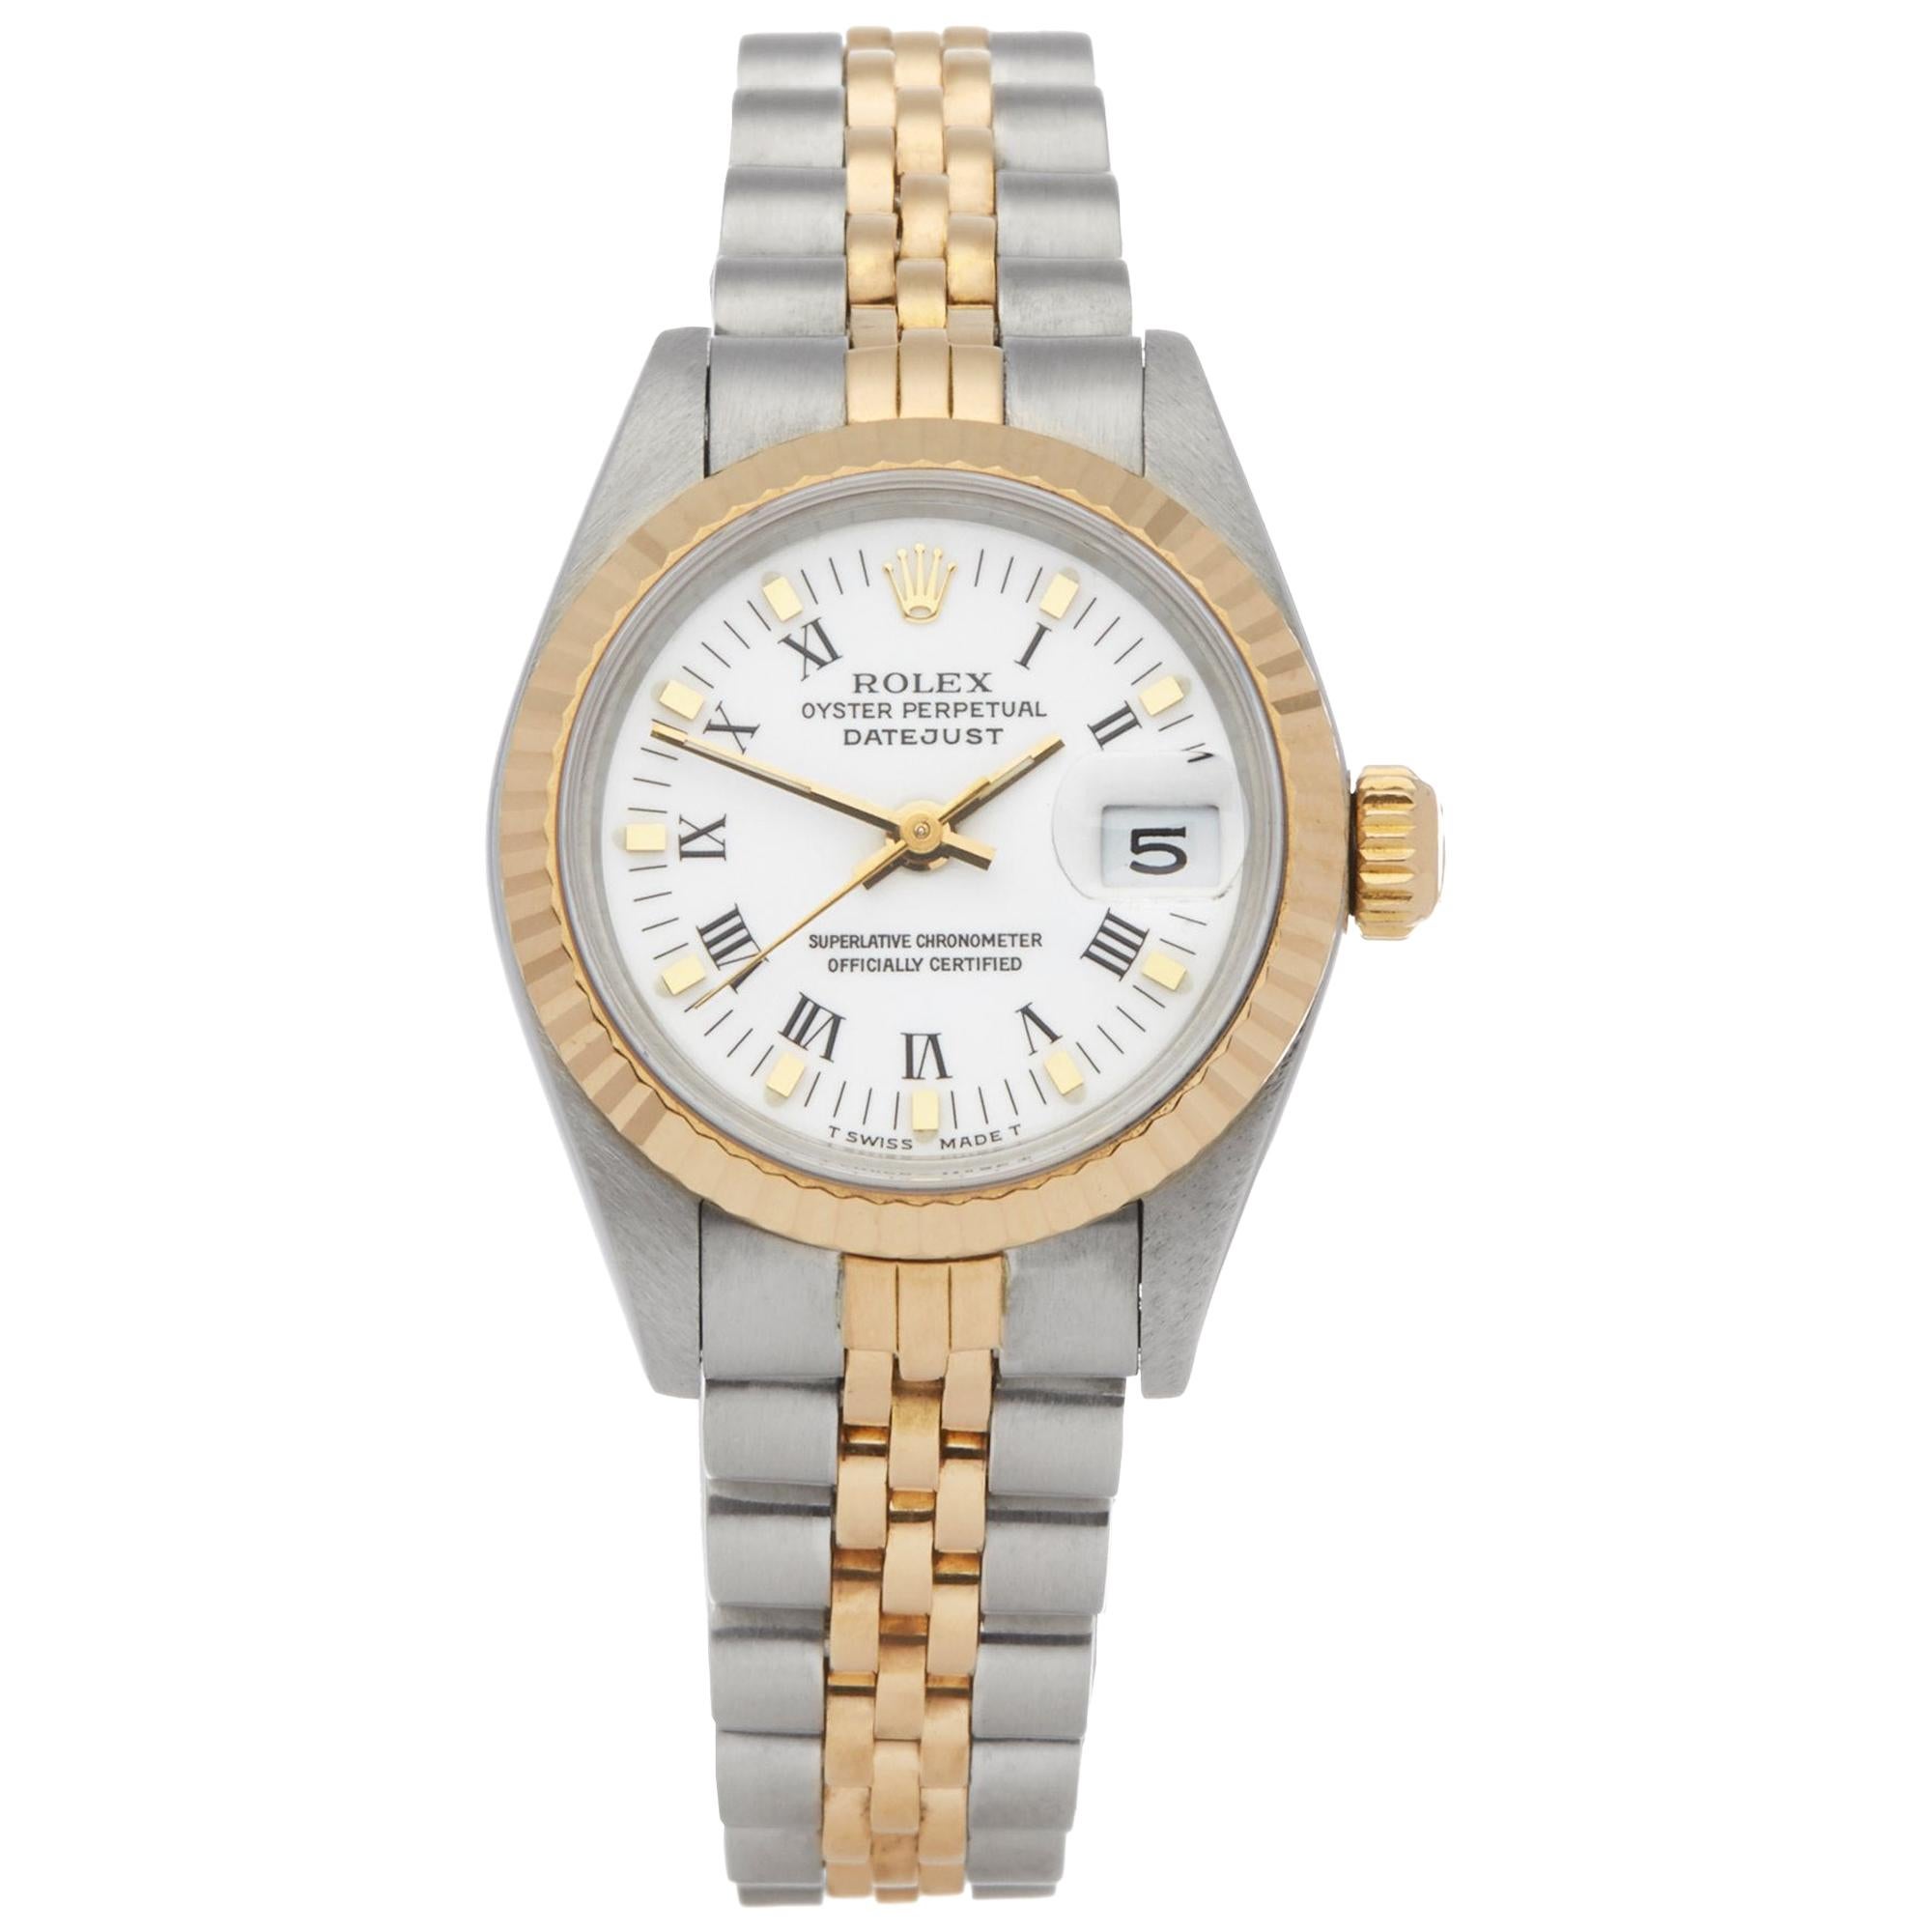 Rolex Datejust 26 69173 Ladies Stainless Steel and Yellow Gold Watch